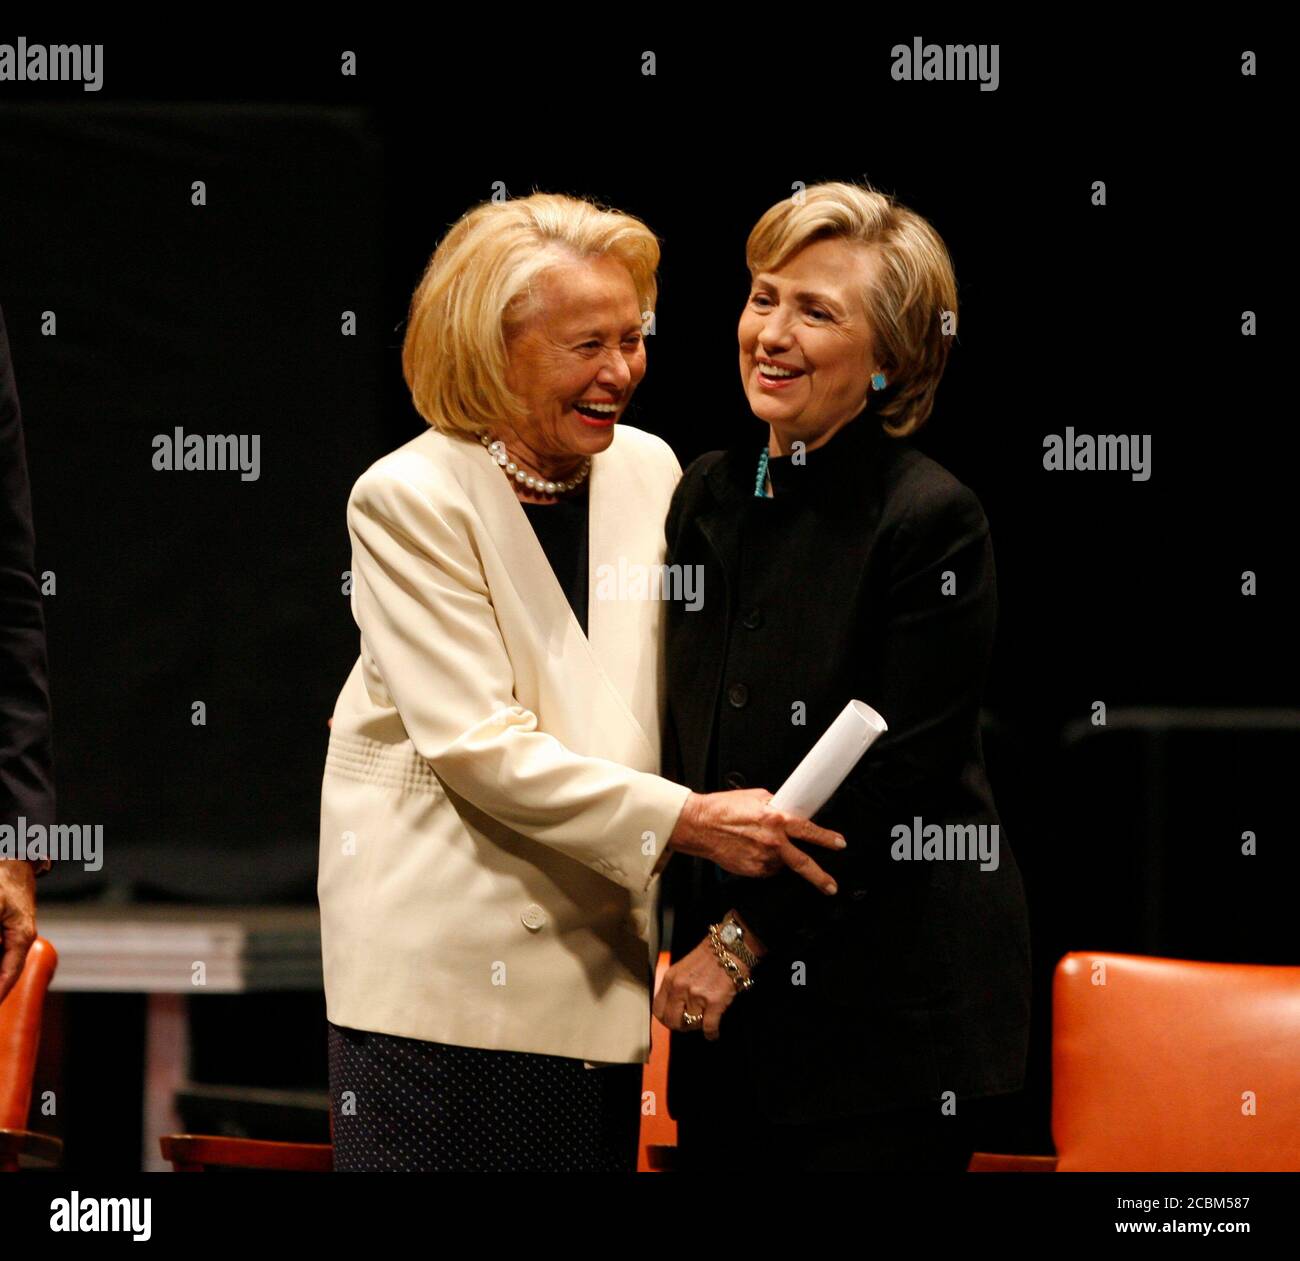 Austin, Texas USA, September 18, 2006: New York newspaper columnist Liz Smith (l) shares a laugh with former First Lady and current Sen. Hillary Rodham Clinton after both spoke at the memorial service for former Texas Governor Ann Richards, who died this week of cancer. ©Bob Daemmrich Stock Photo